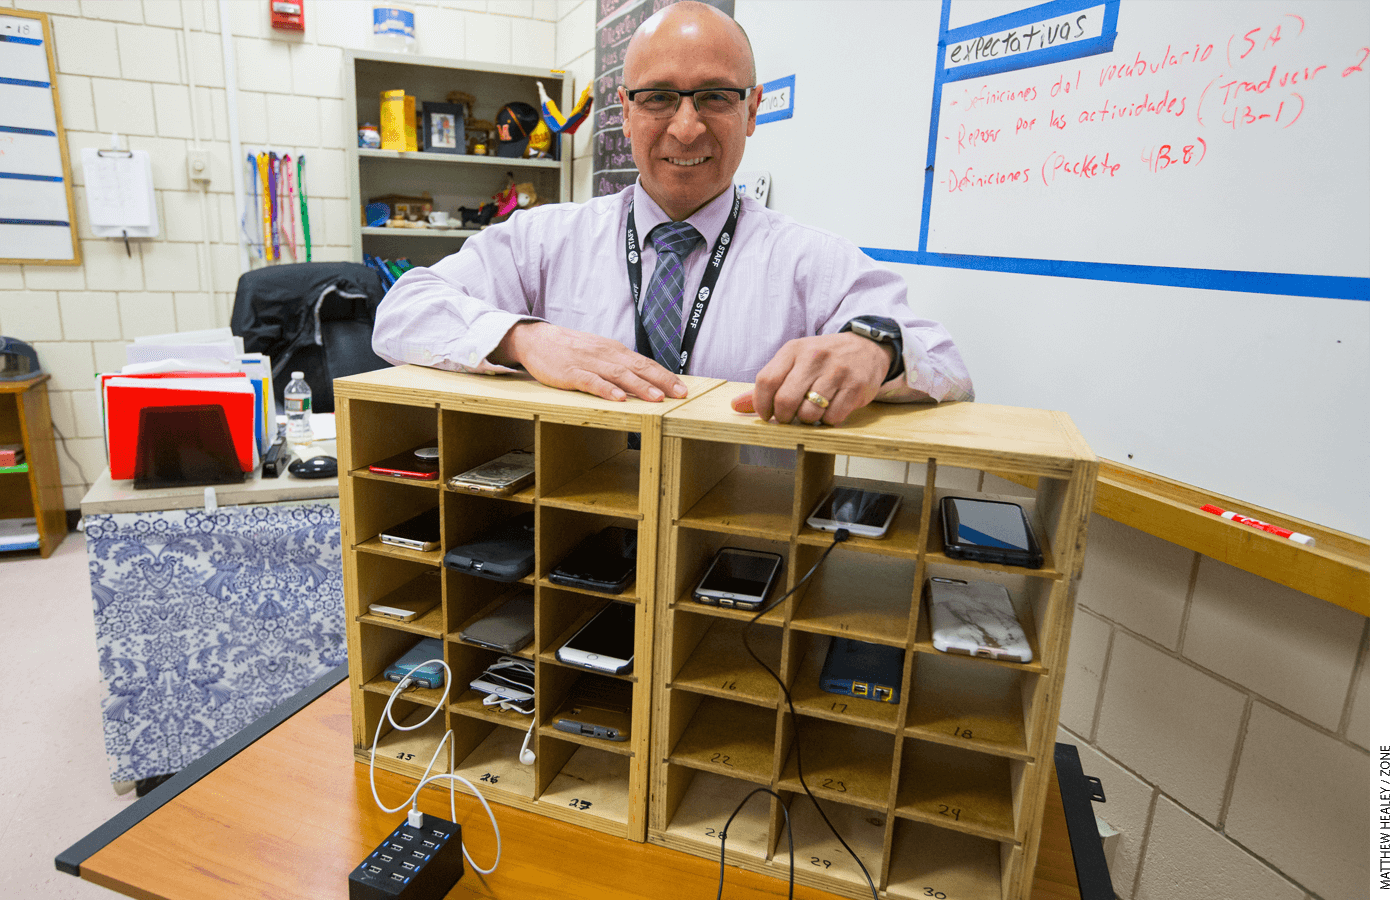 In Gerry Padilla’s Spanish classes at Marlborough High School in Massachusetts, students leave devices in a “cell phone hotel.” Restricting phone access doesn’t have to mean a ban.